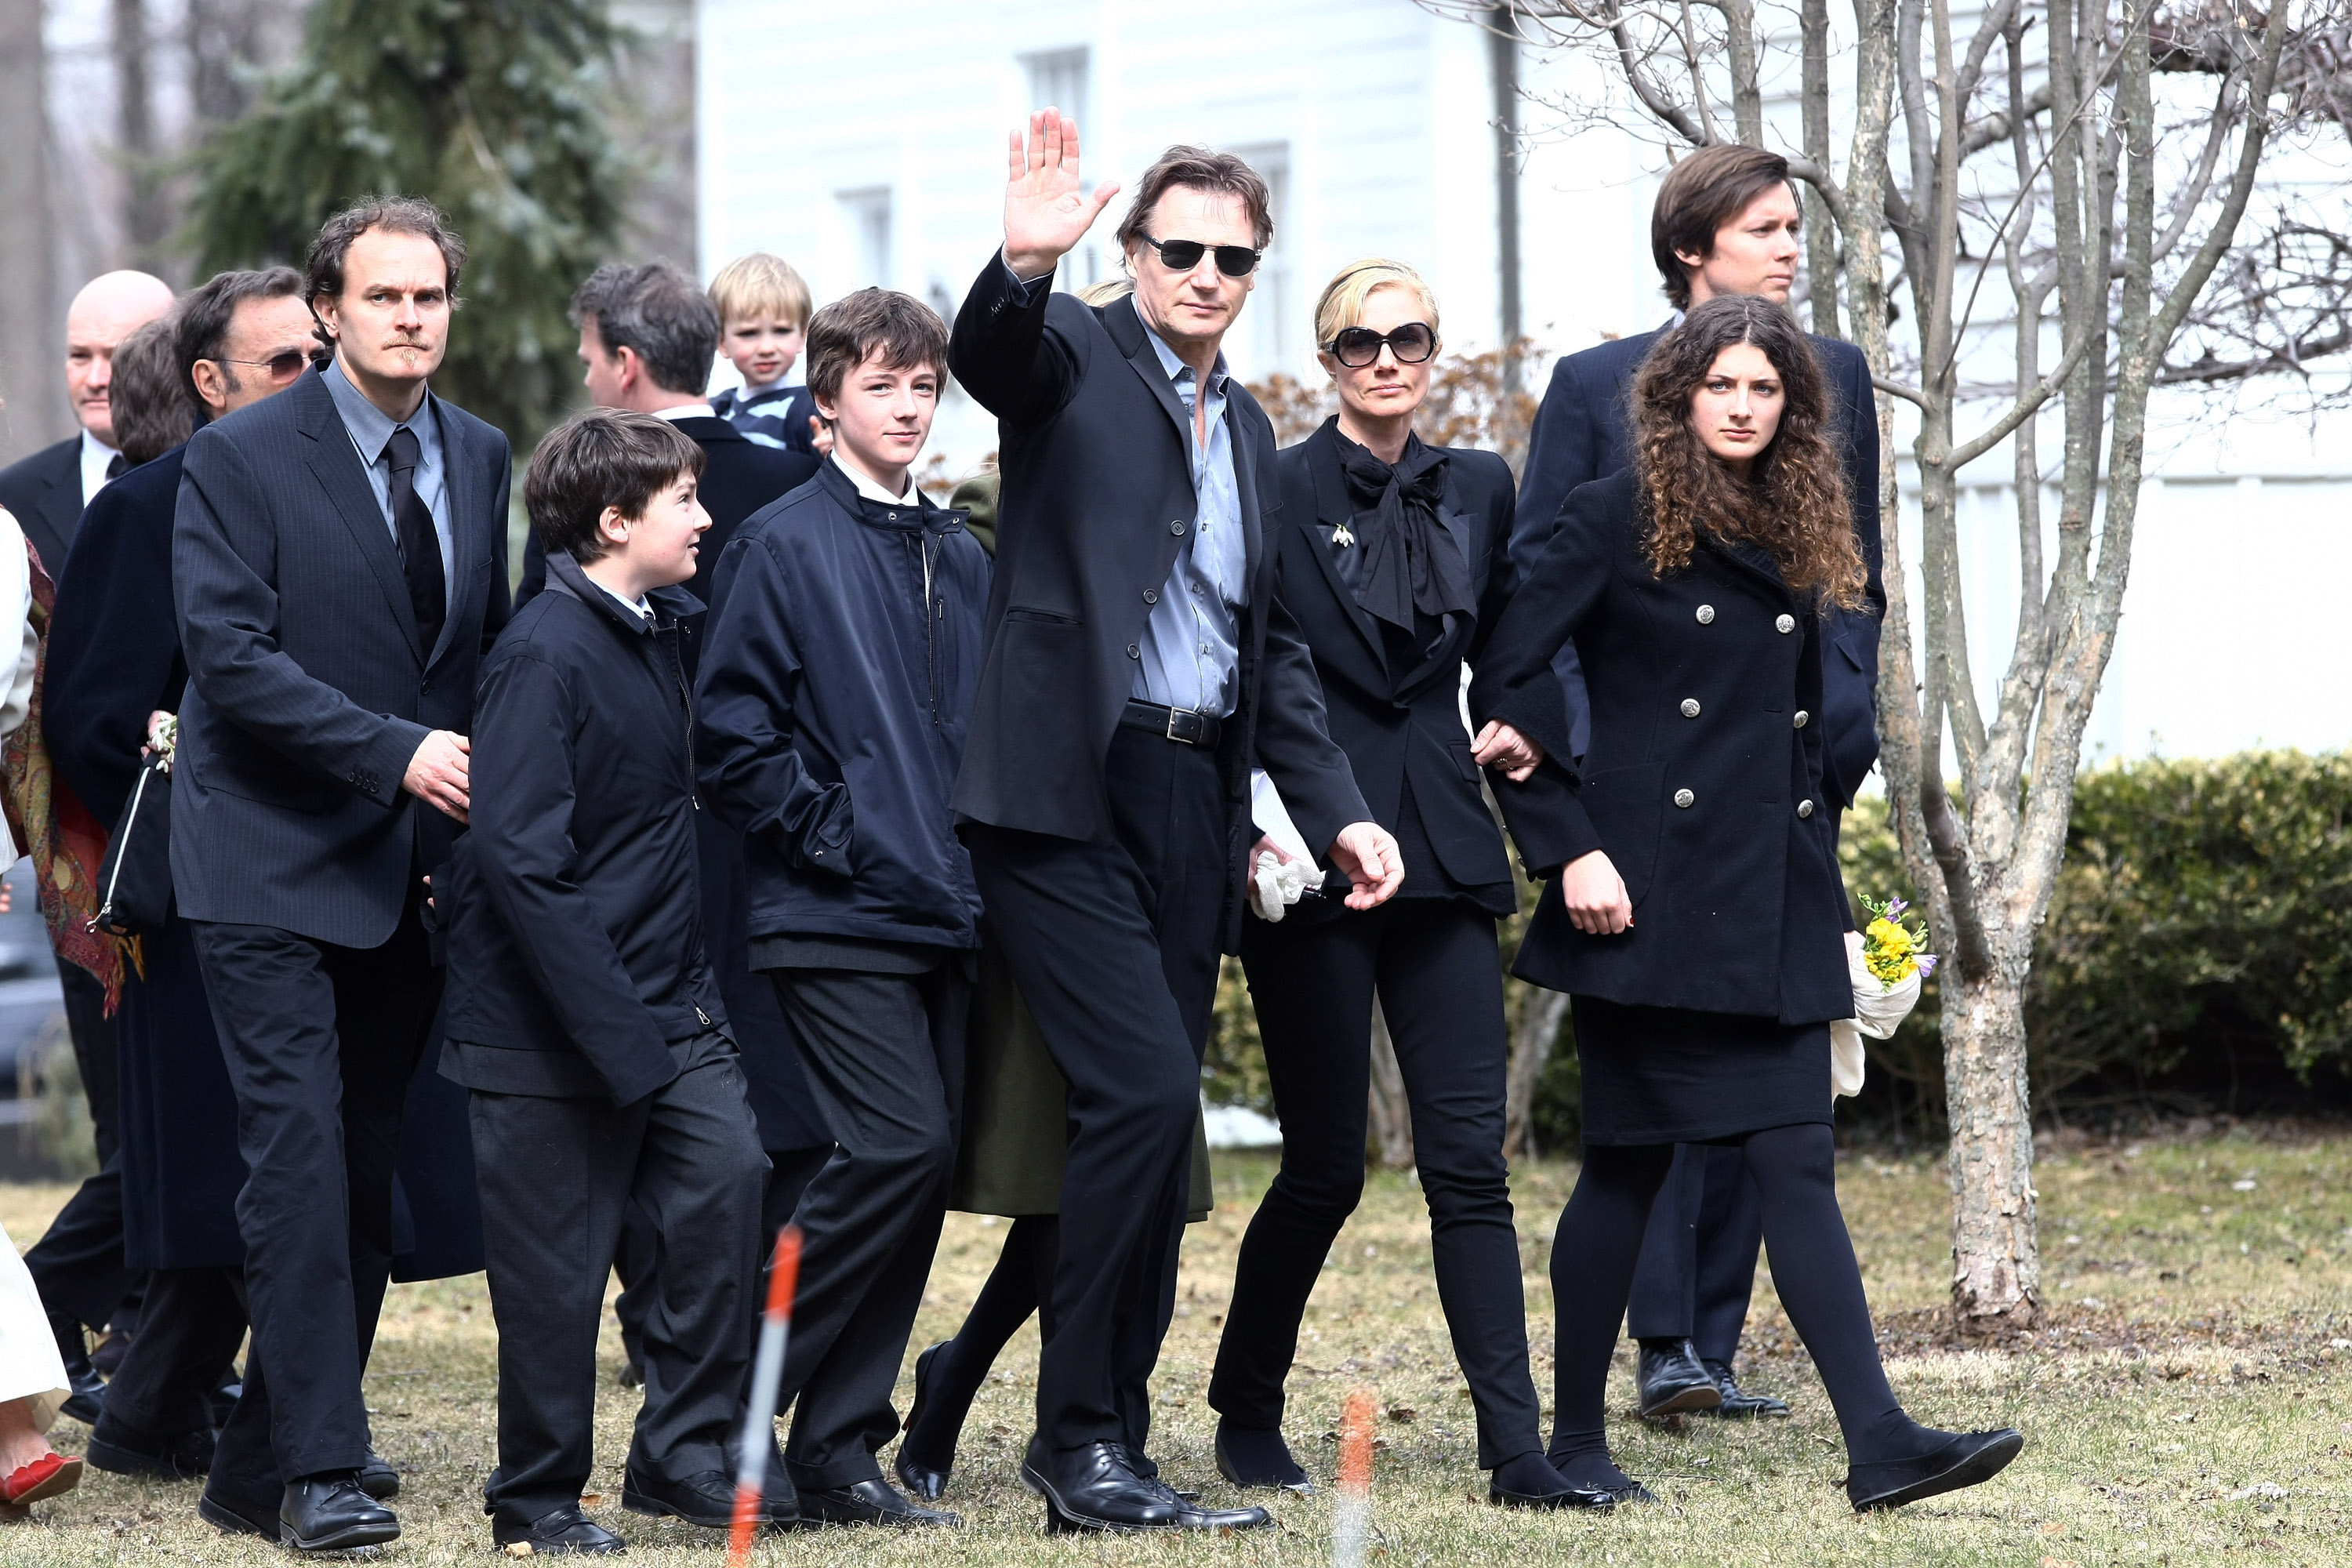 Liam Neeson with sons Micheal and Daniel Neeson, and Joely Richardson at the funeral of Natasha Richardson at St. Peter's Lithgow Episcopal Church on March 22, 2009, in Lithgow, New York | Source: Getty Images